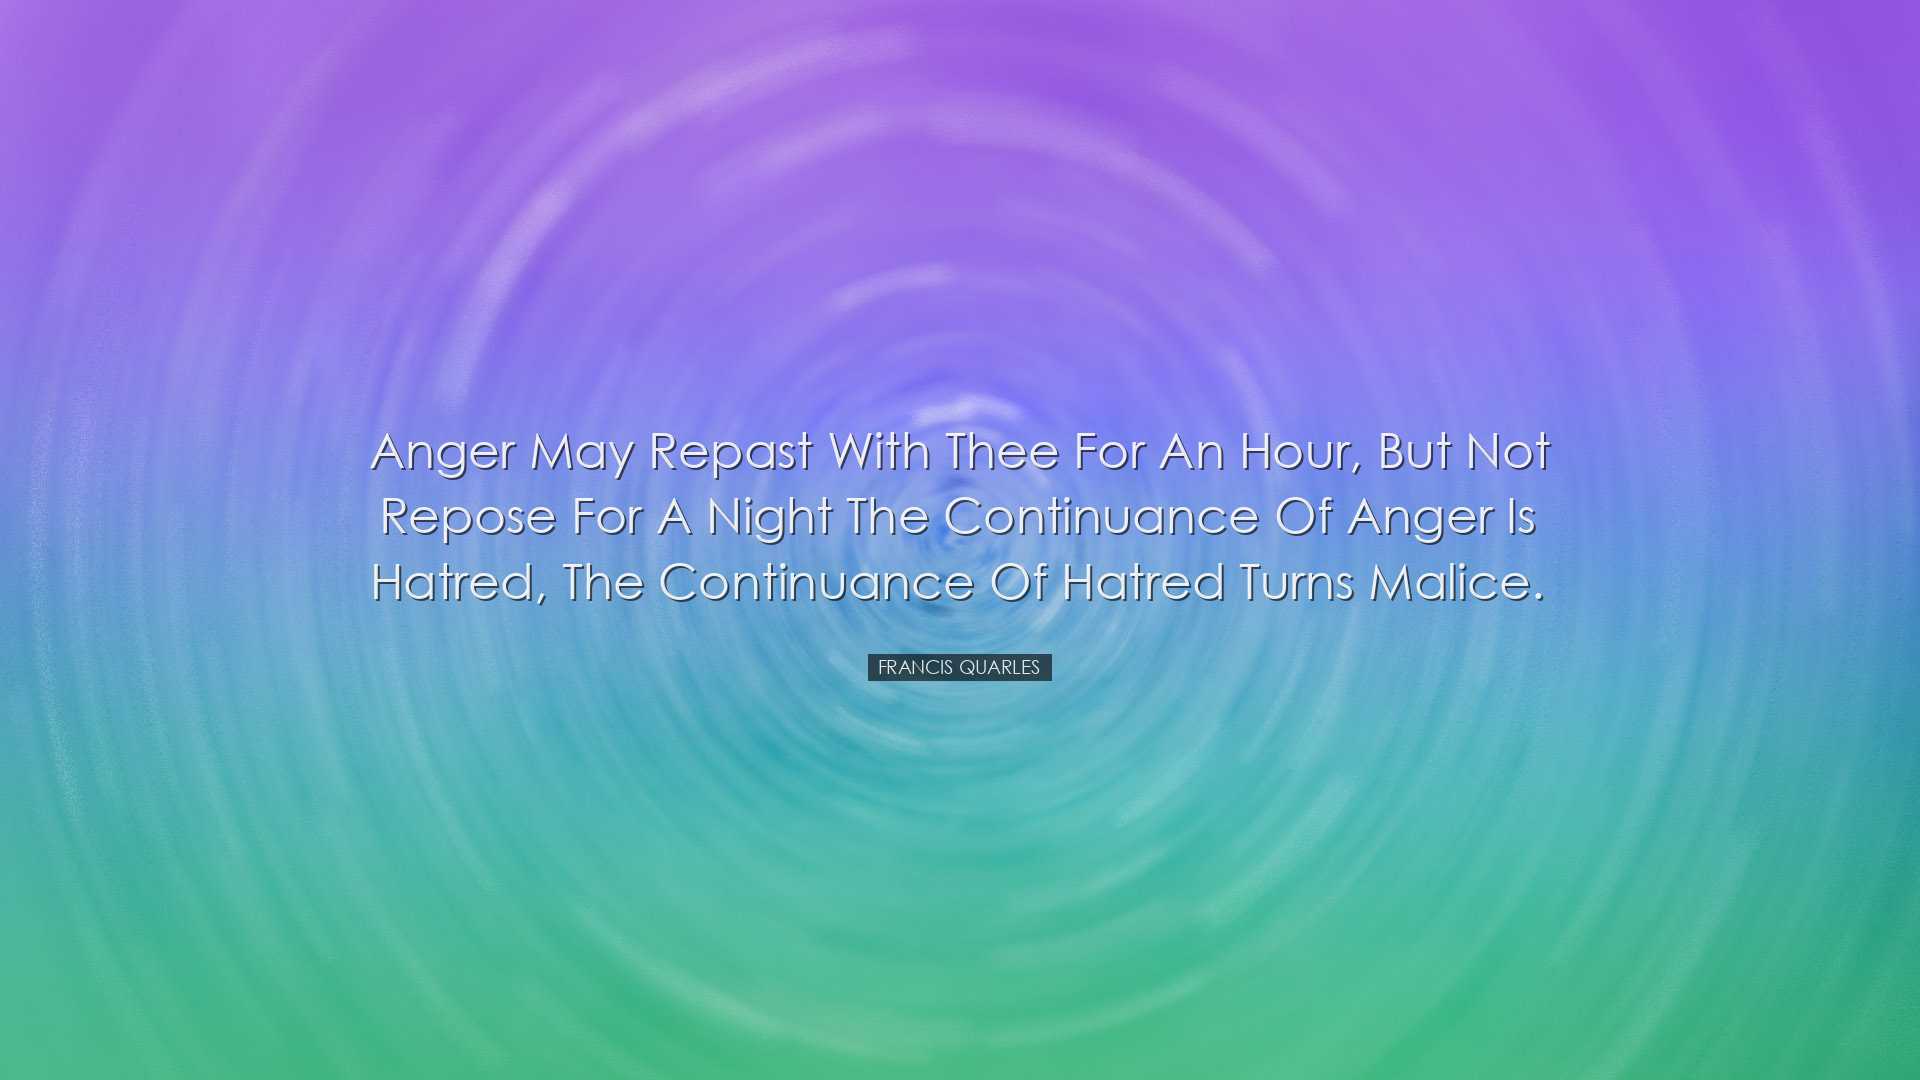 Anger may repast with thee for an hour, but not repose for a night